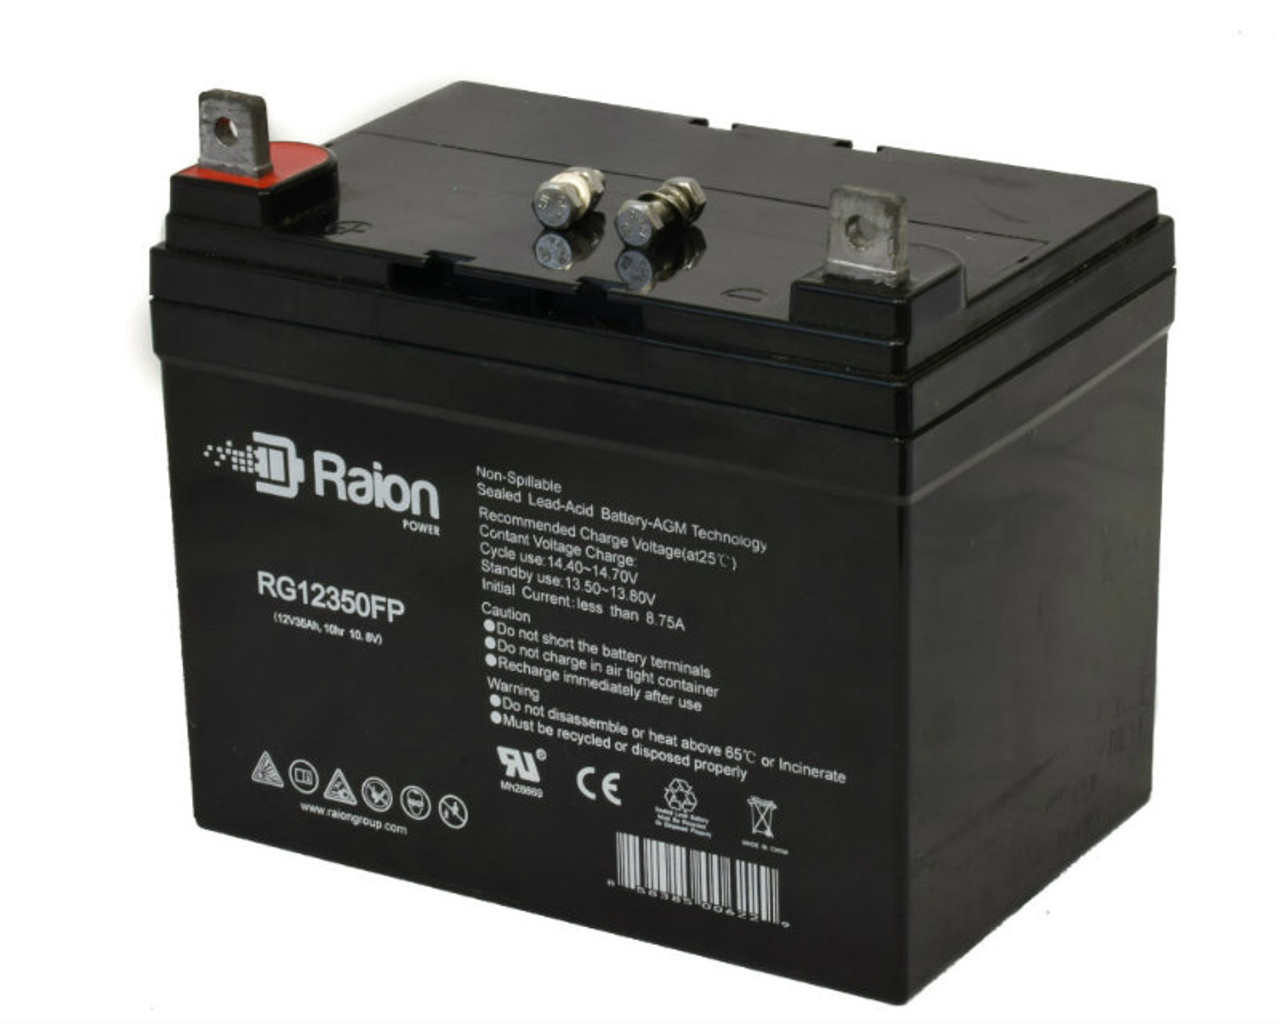 Raion Power Replacement 12V 35Ah RG12350FP Battery for Case International 442